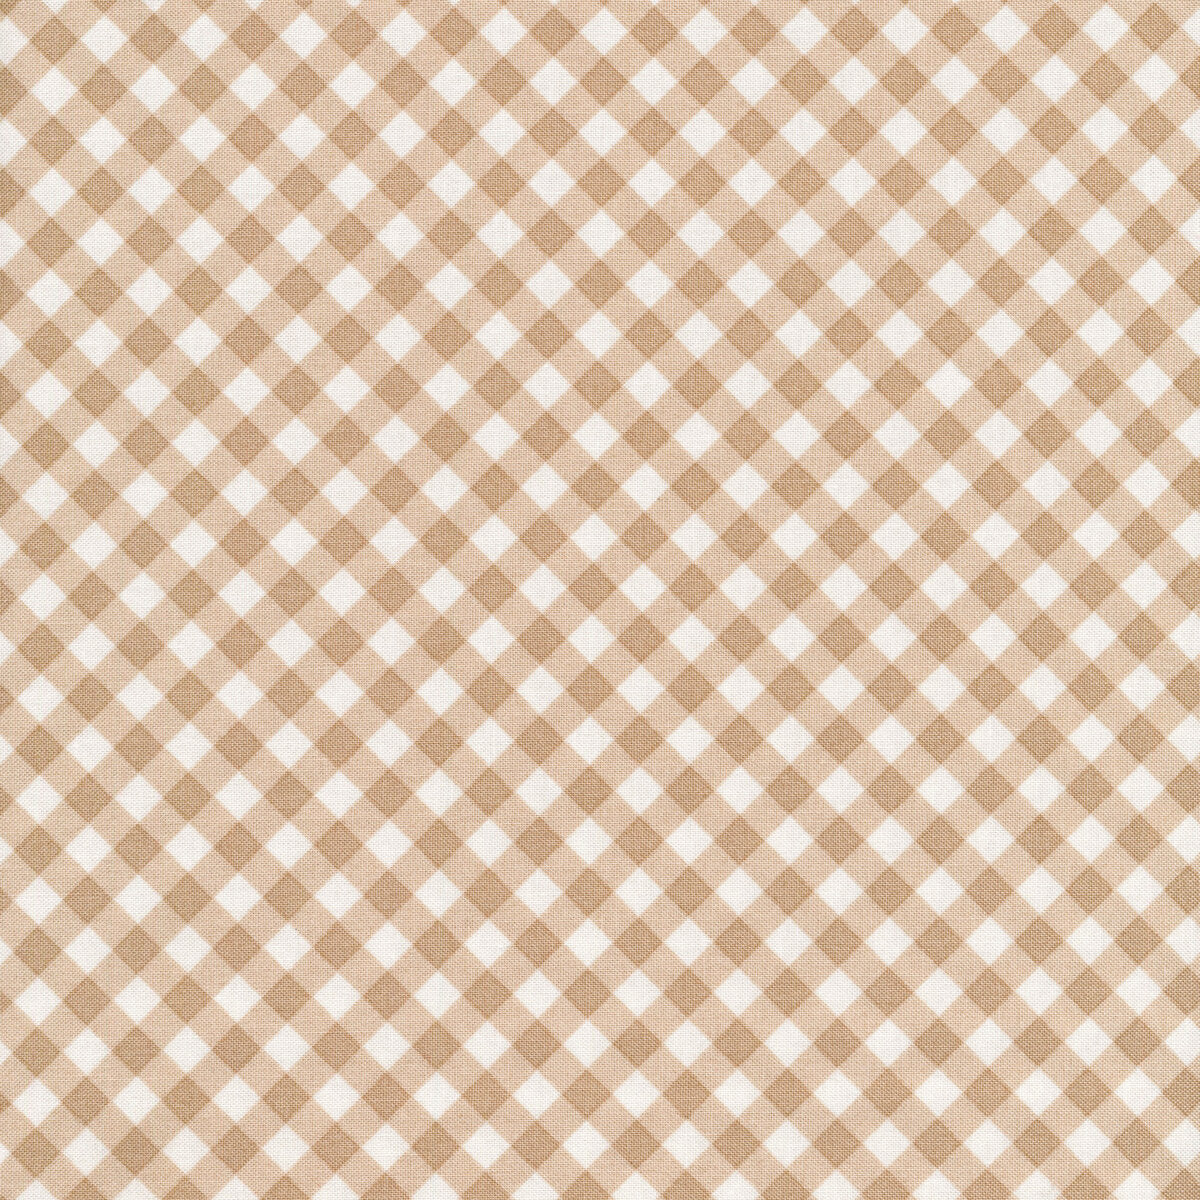 Christmas Stitched - Gingham in Linen 520443-16